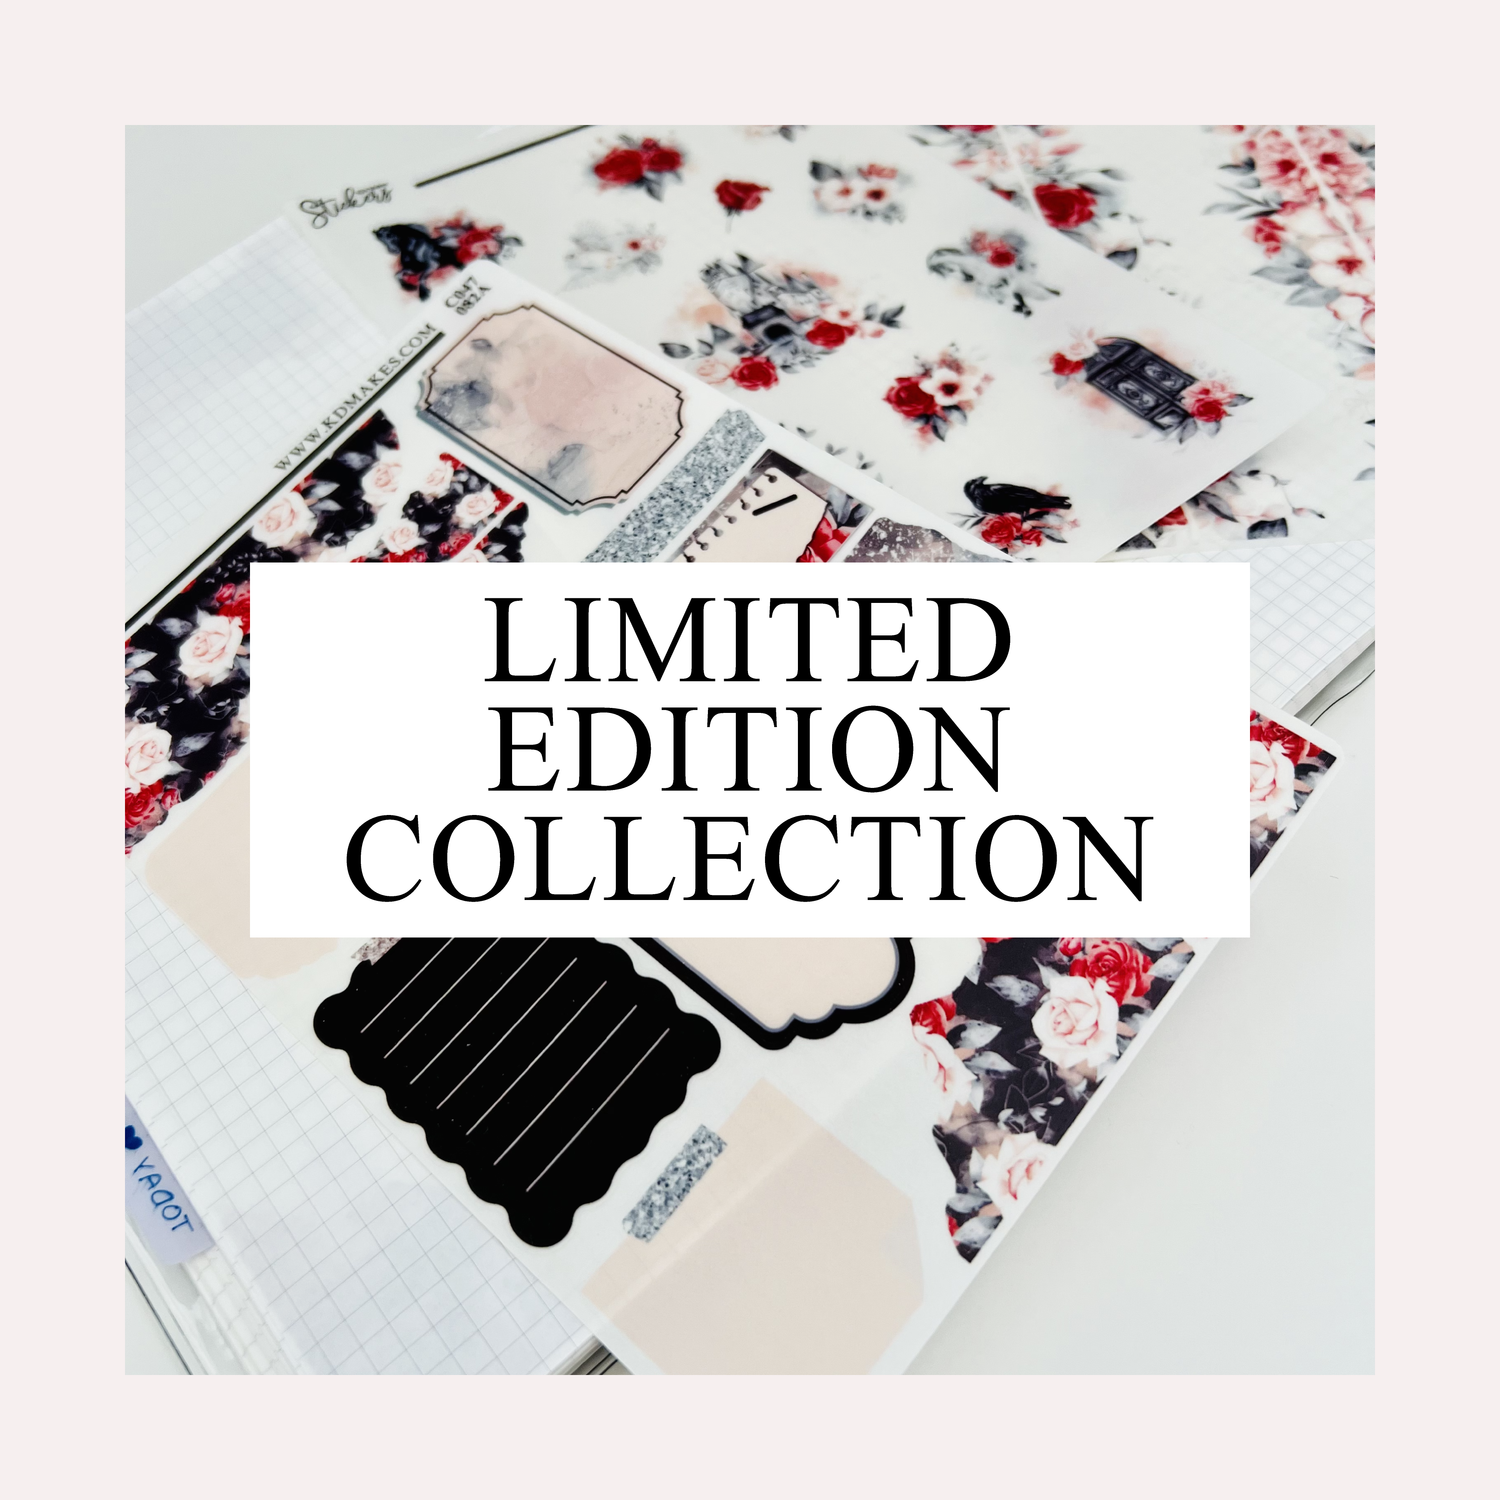 LIMITED EDITION COLLECTIONS